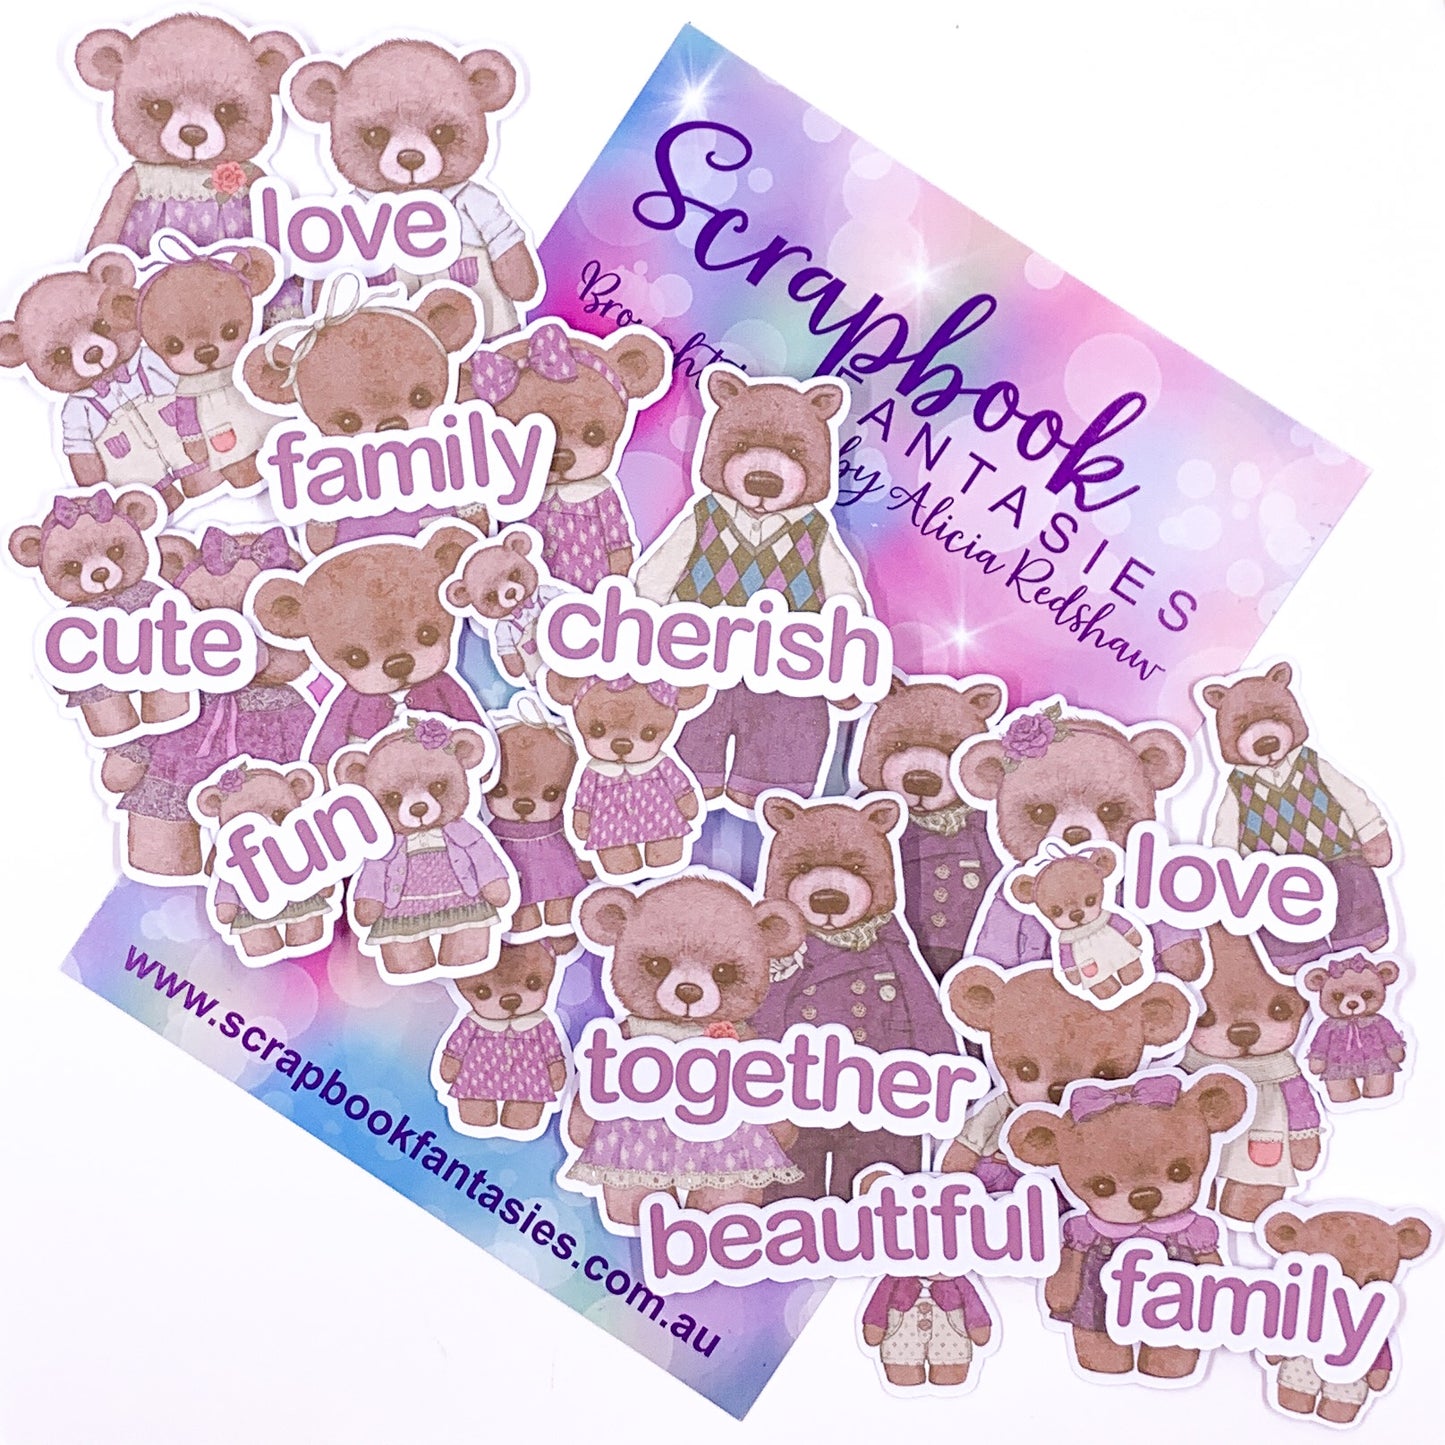 Beautiful Family - Bears & Words 5 Colour-Cuts (35 pieces) Lavender & Brown - Designed by Alicia Redshaw